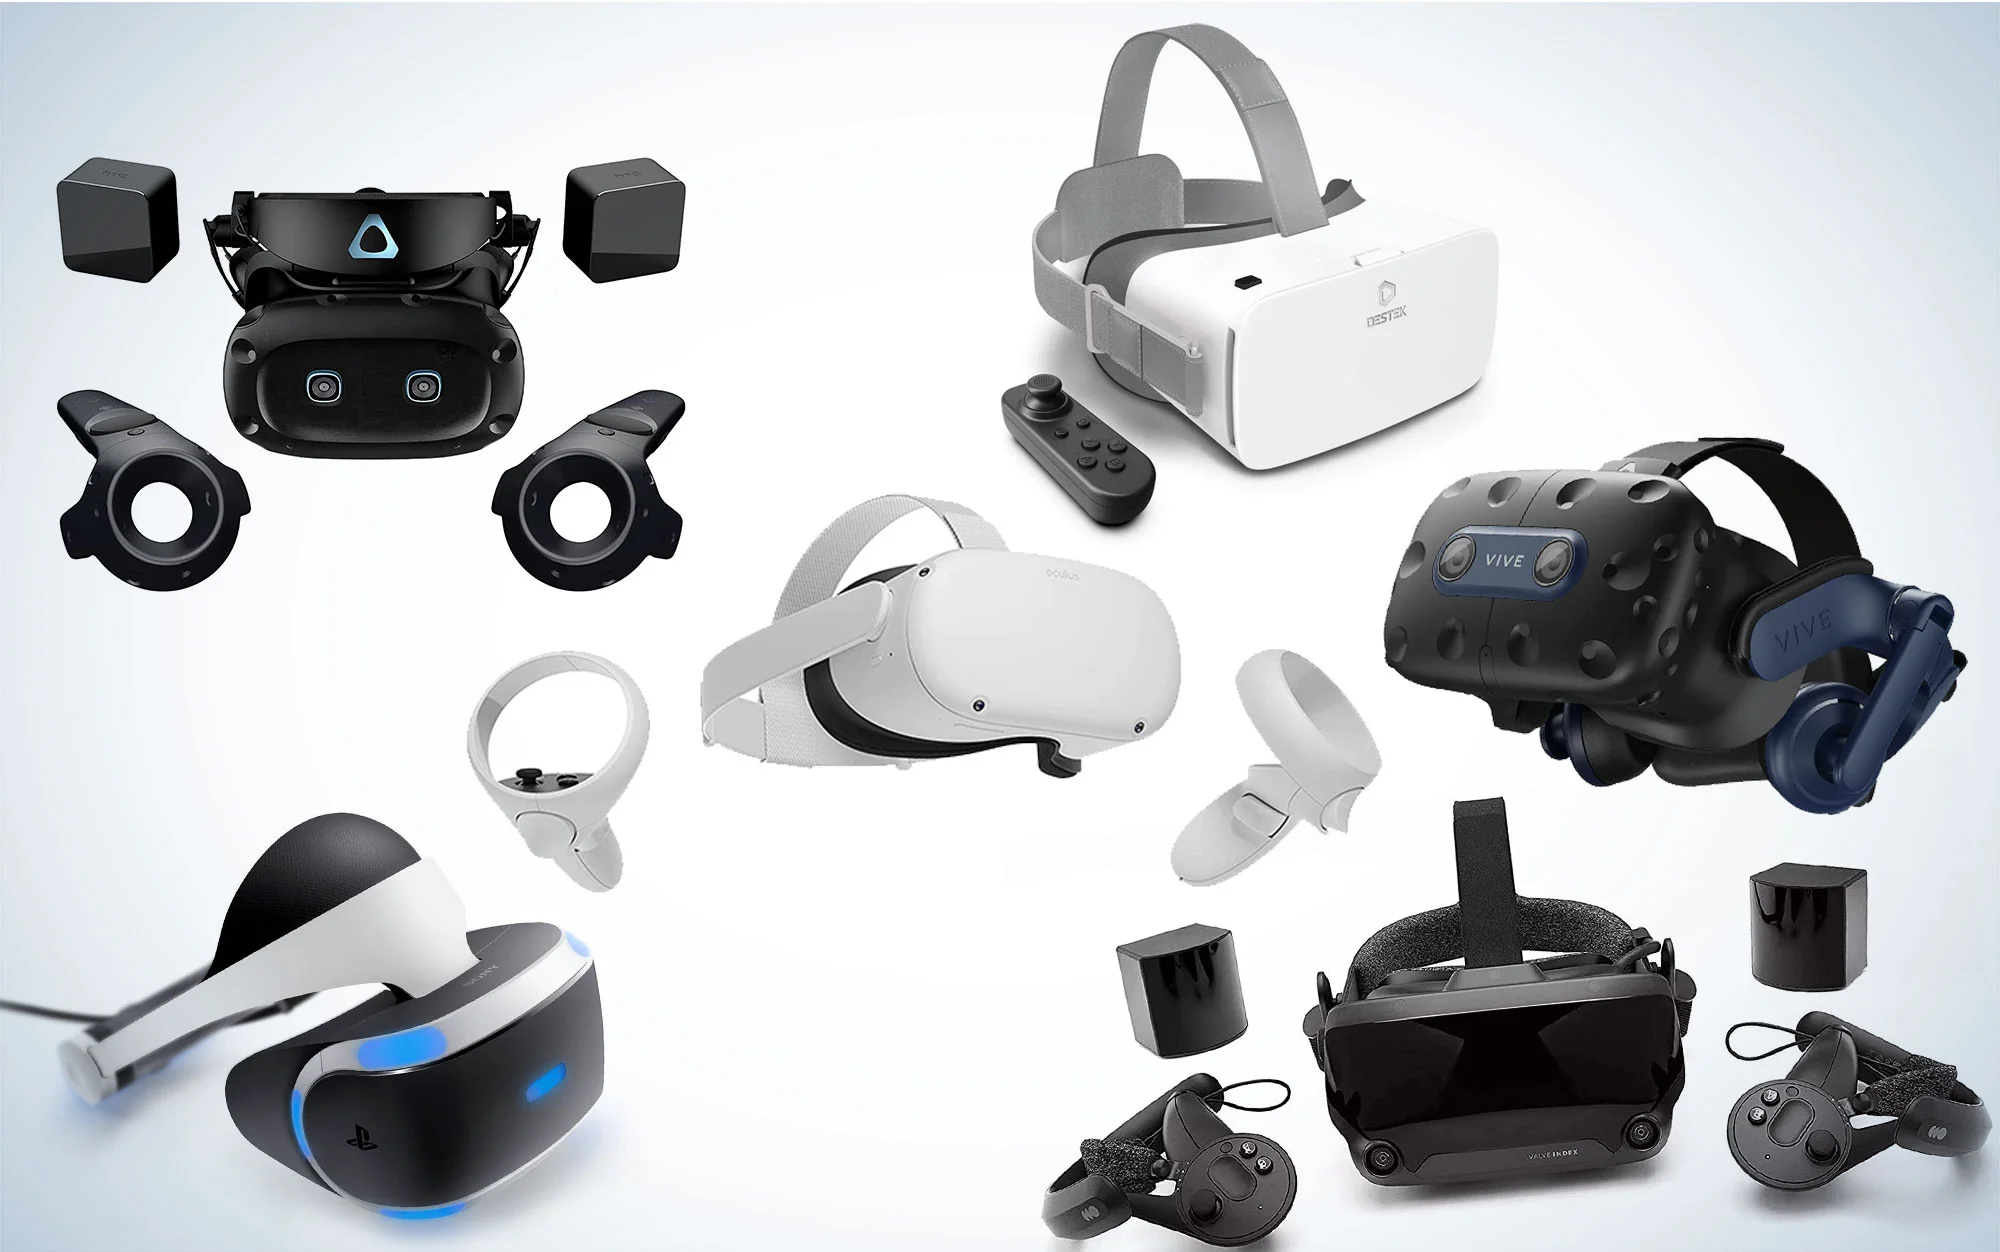 purchase your VR headsets at Victoryxr.co